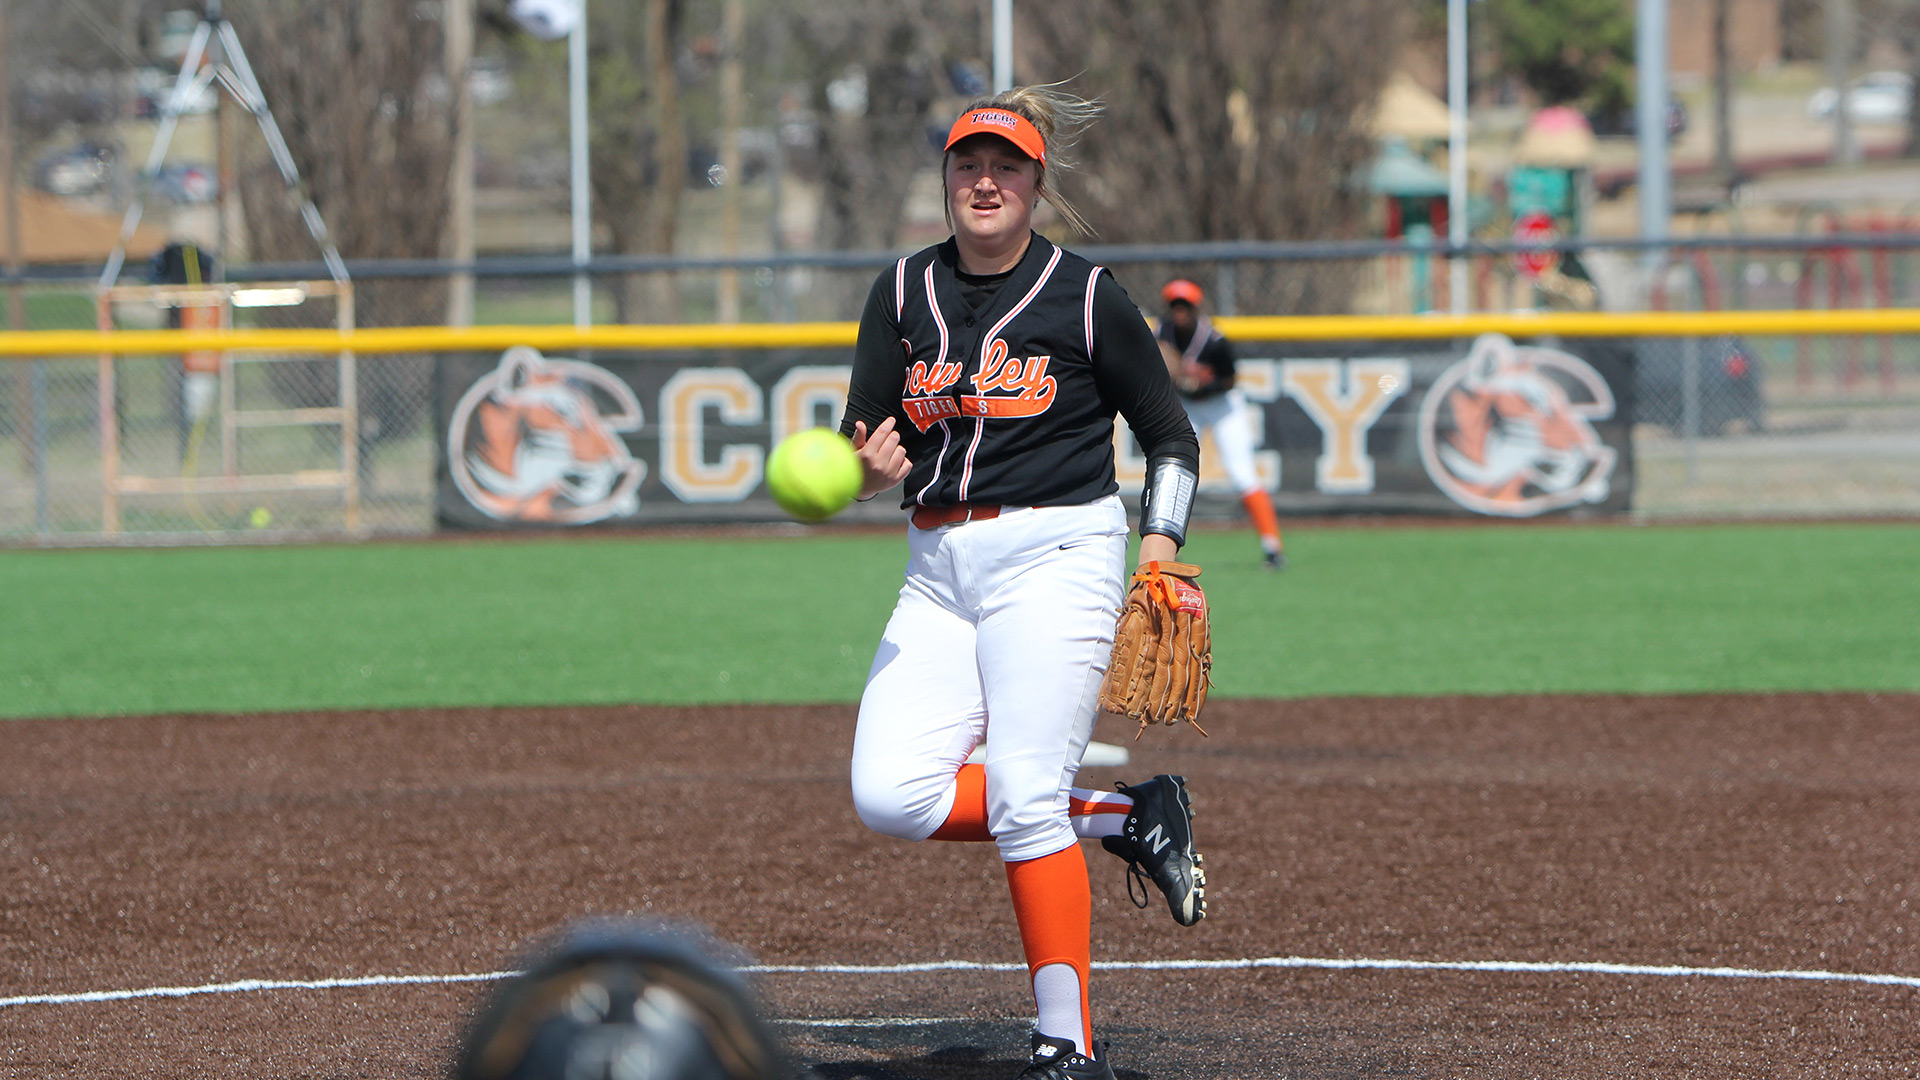 Mercer breaks strikeout record in pair of one-run defeats